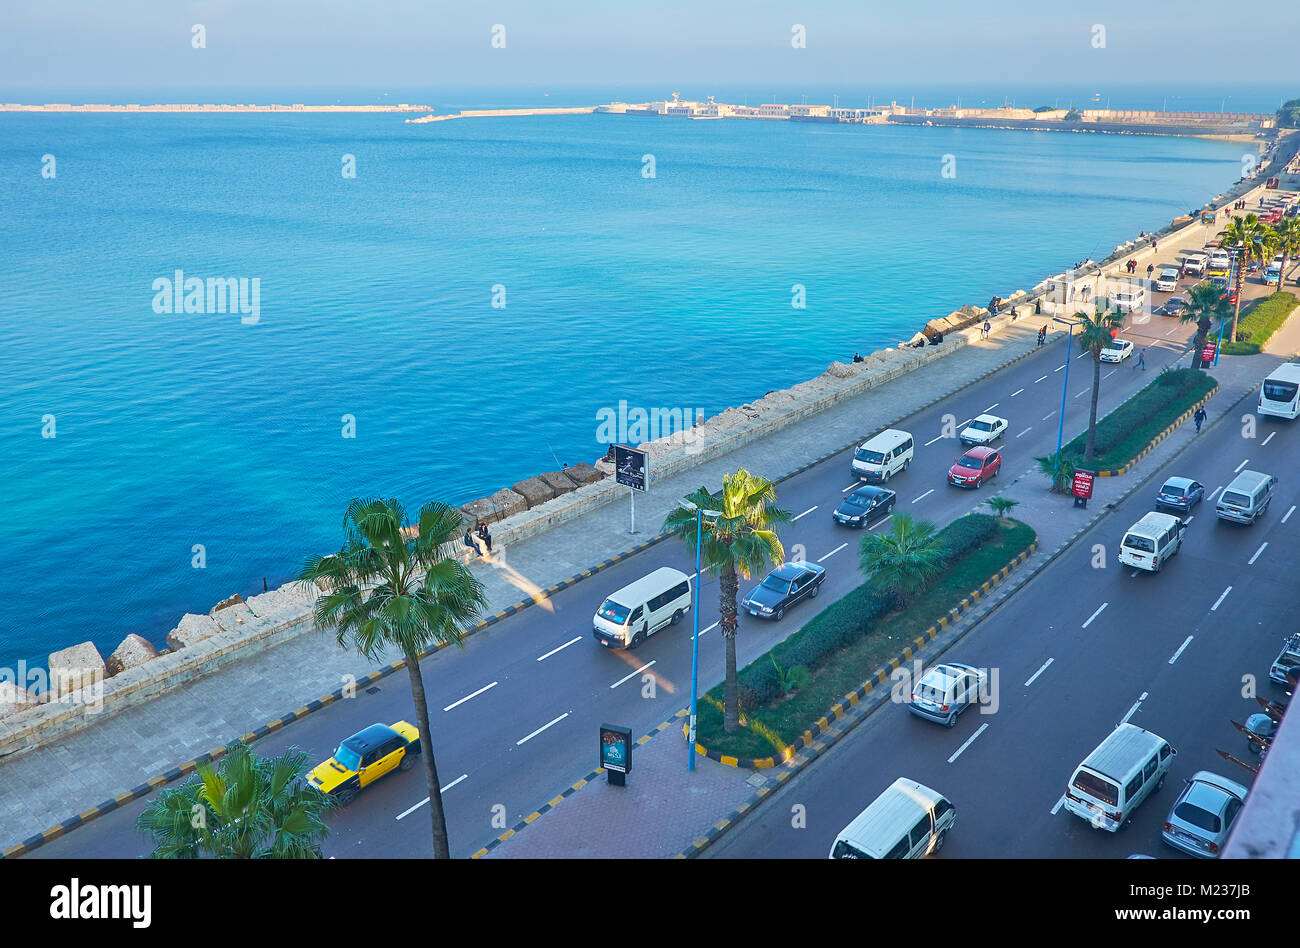 ALEXANDRIA, EGYPT - DECEMBER 18, 2017: Aerial view of morning traffic along the seaside embankment - Corniche avenue, on December 18 in Alexandria. Stock Photo